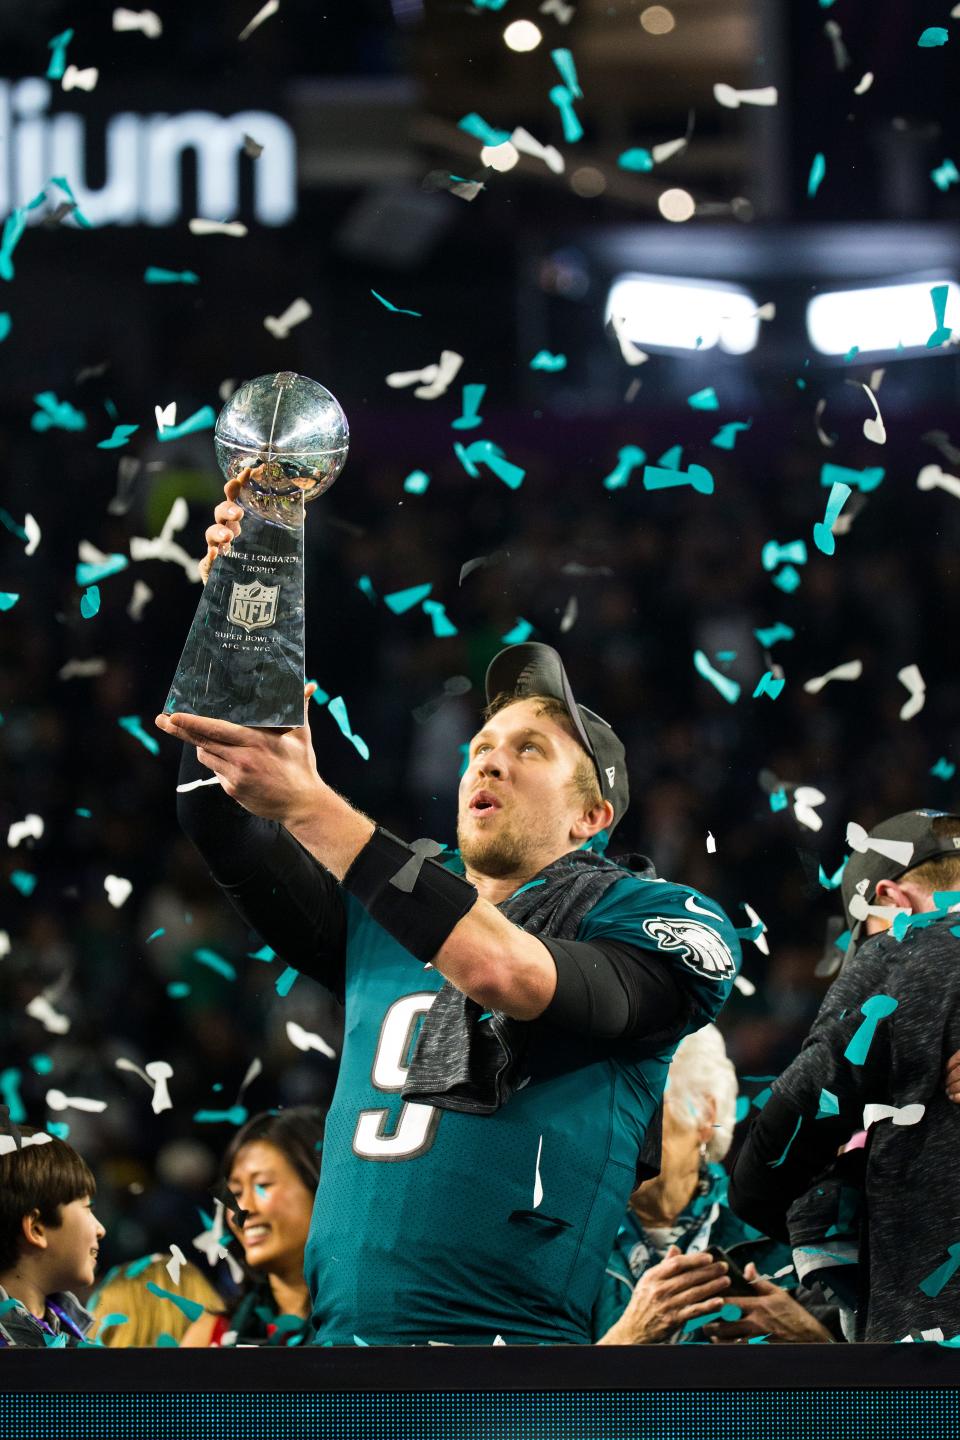 Eagles quarterback Nick Foles holds up the Vince Lombardi Trophy after defeating the New England Patriots 41-33 to win Super Bowl LII in Feb. 2018.